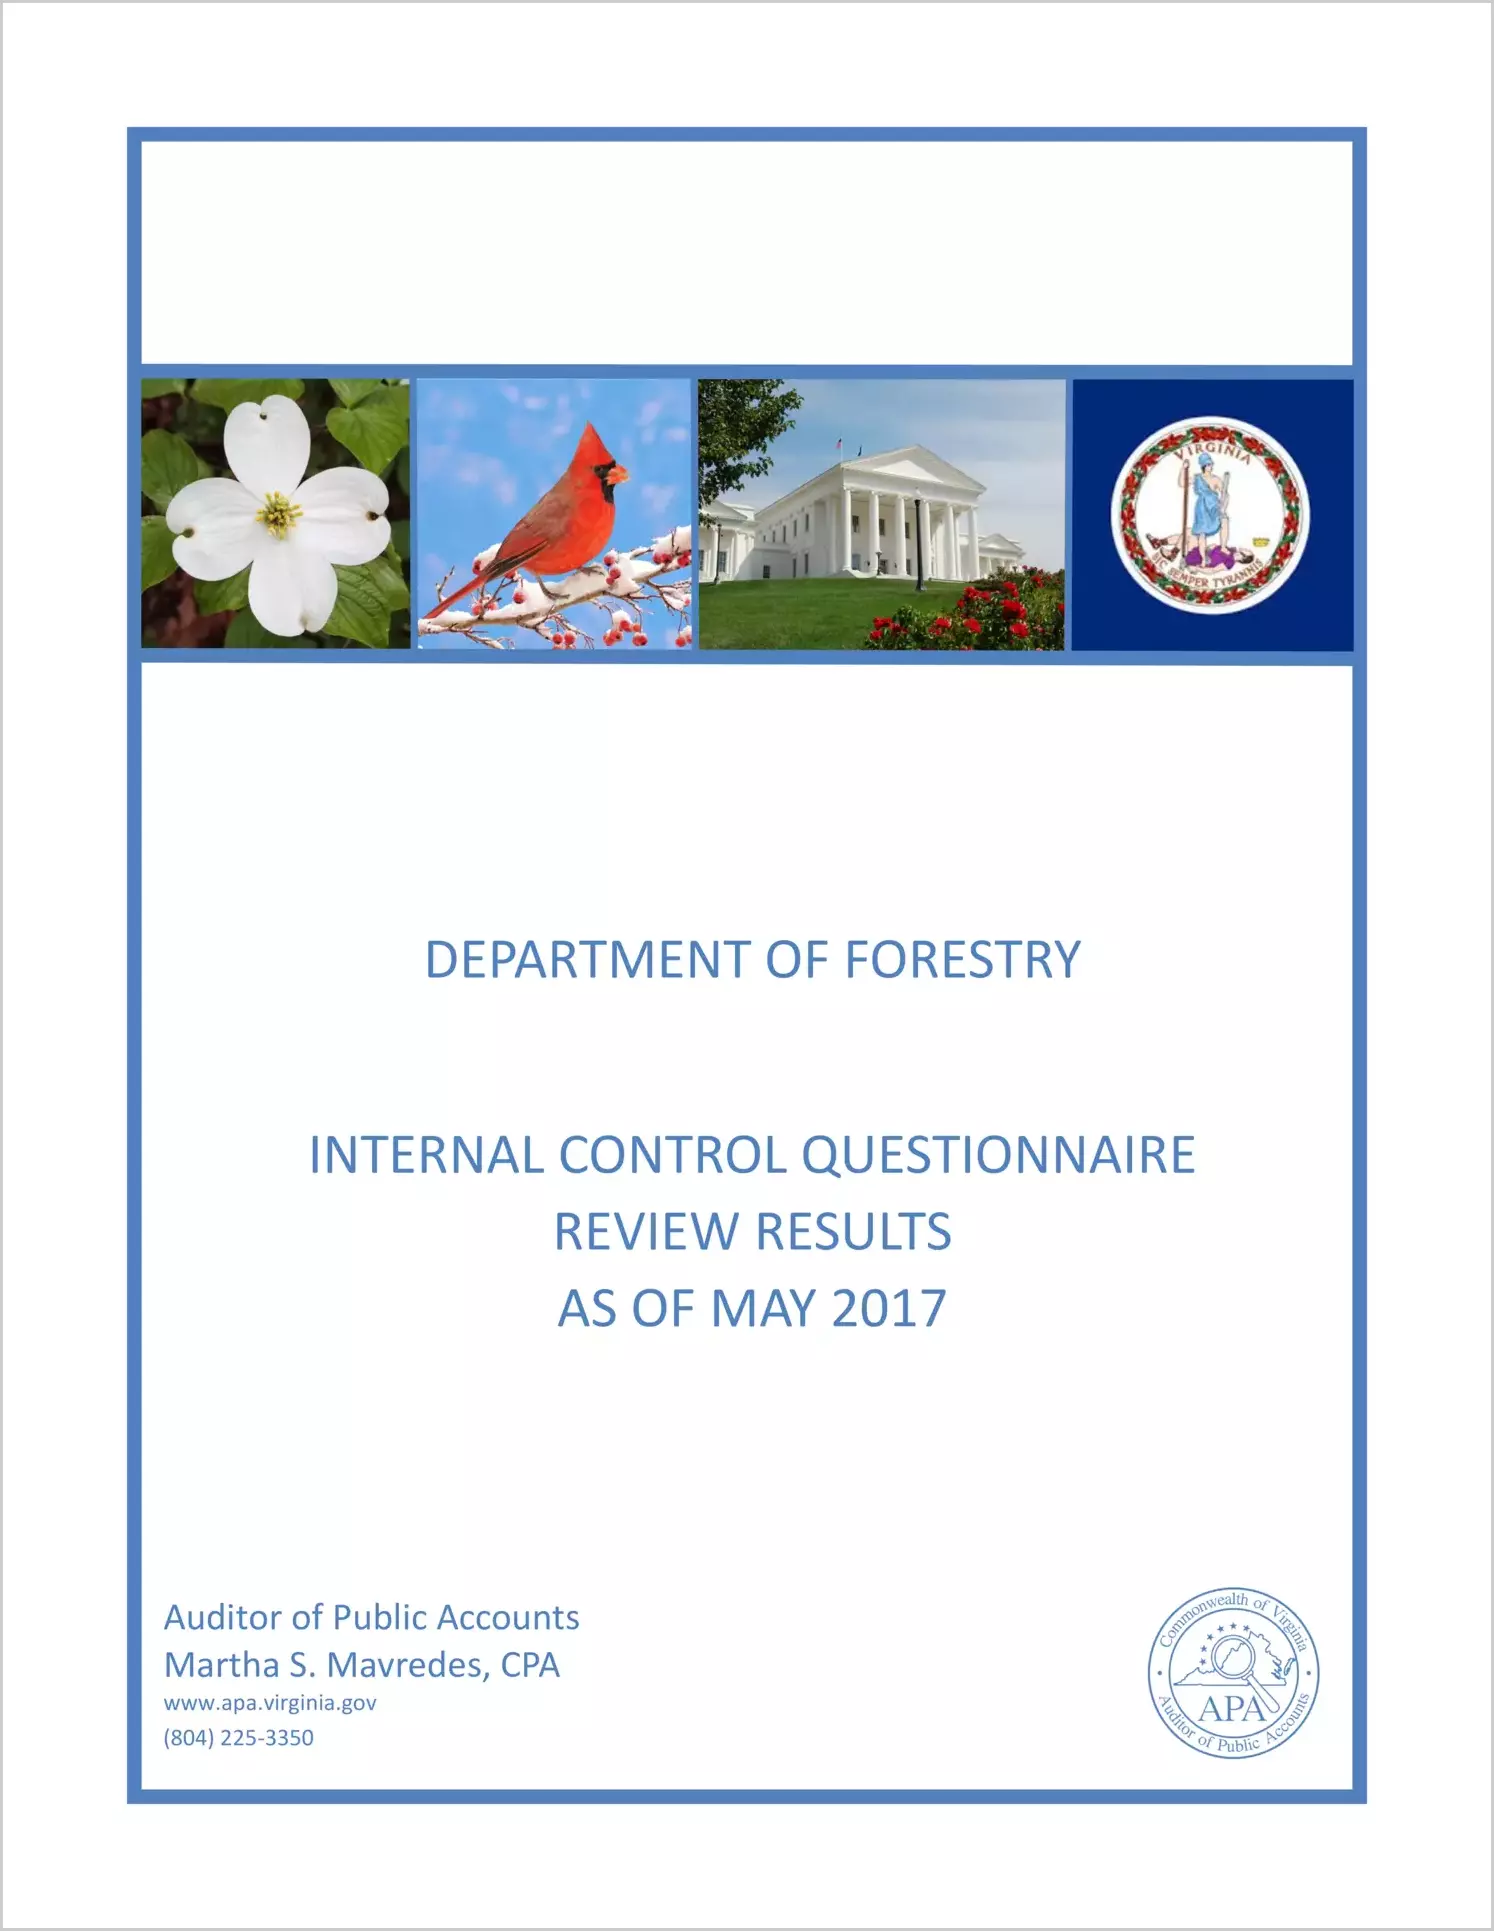 Virginia Department of Forestry Internal Control Questionnaire Review Results as of May 2017